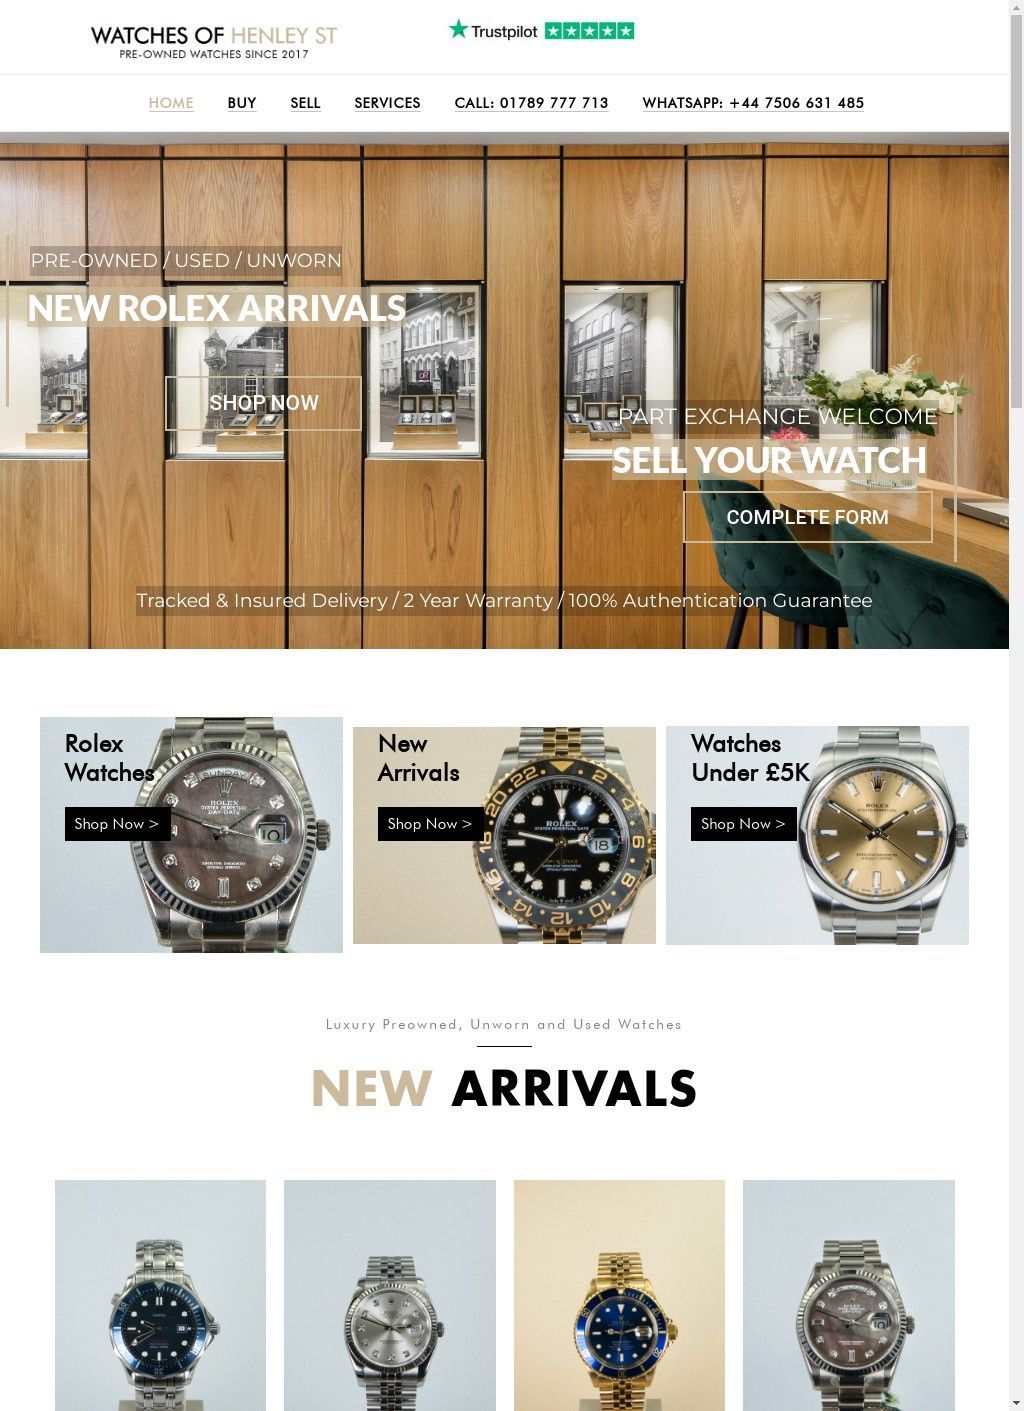 Watches of Henley Street Limited